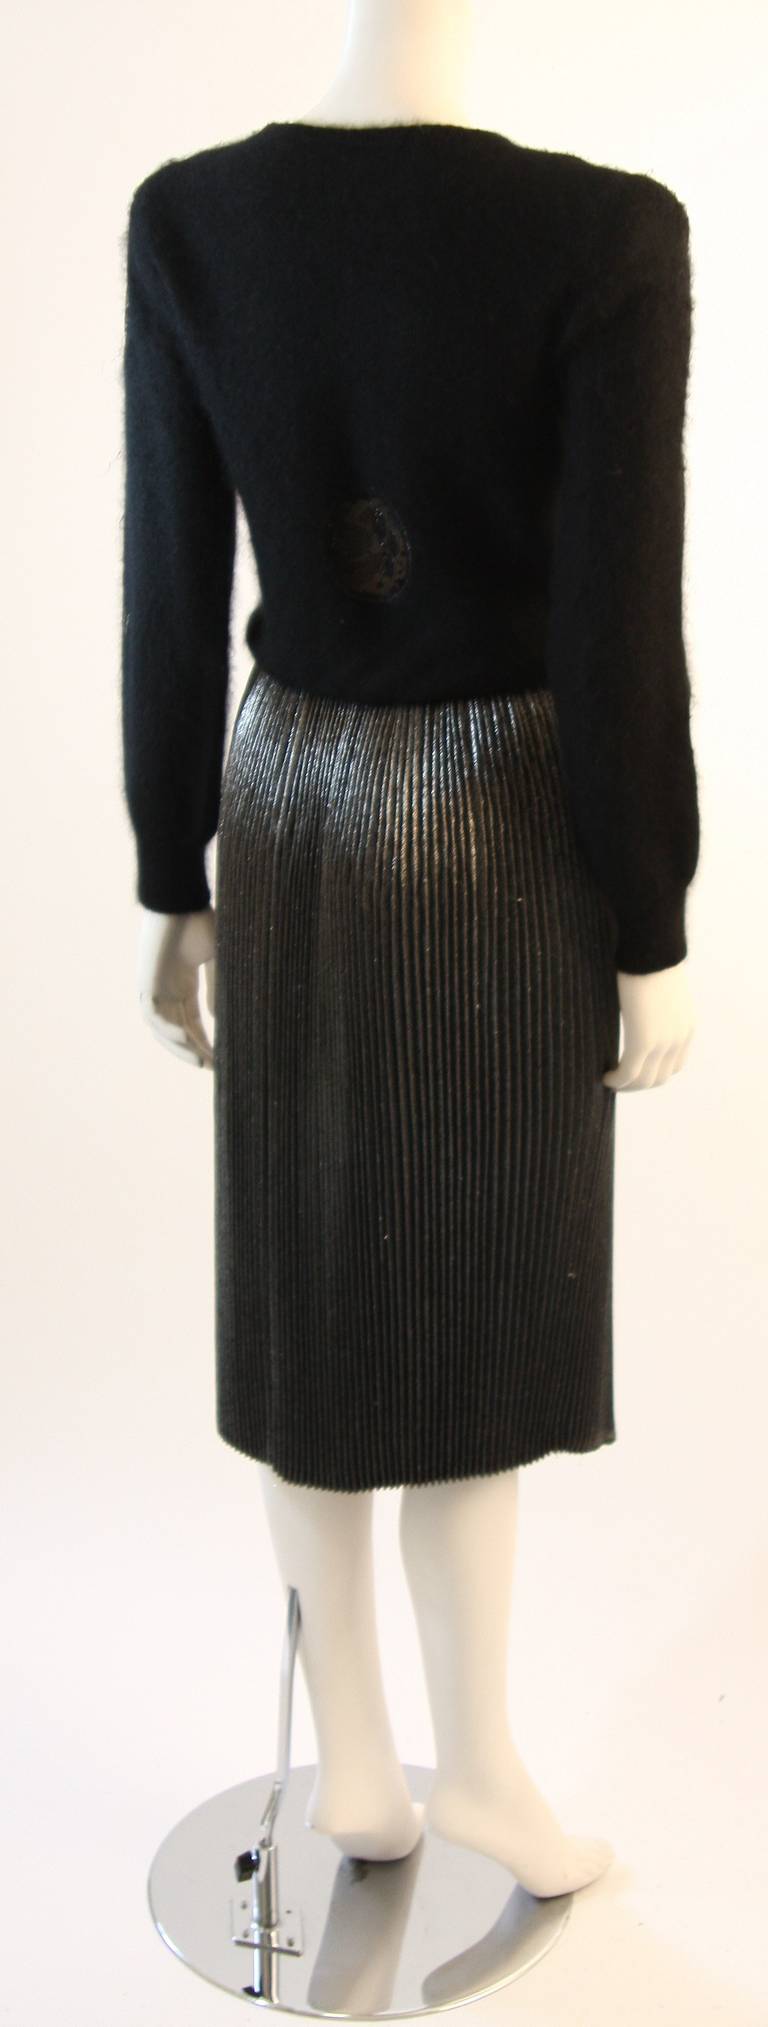 Black Krizia Maglia Angora Sweater with Lace Inset and Metallic Skirt For Sale